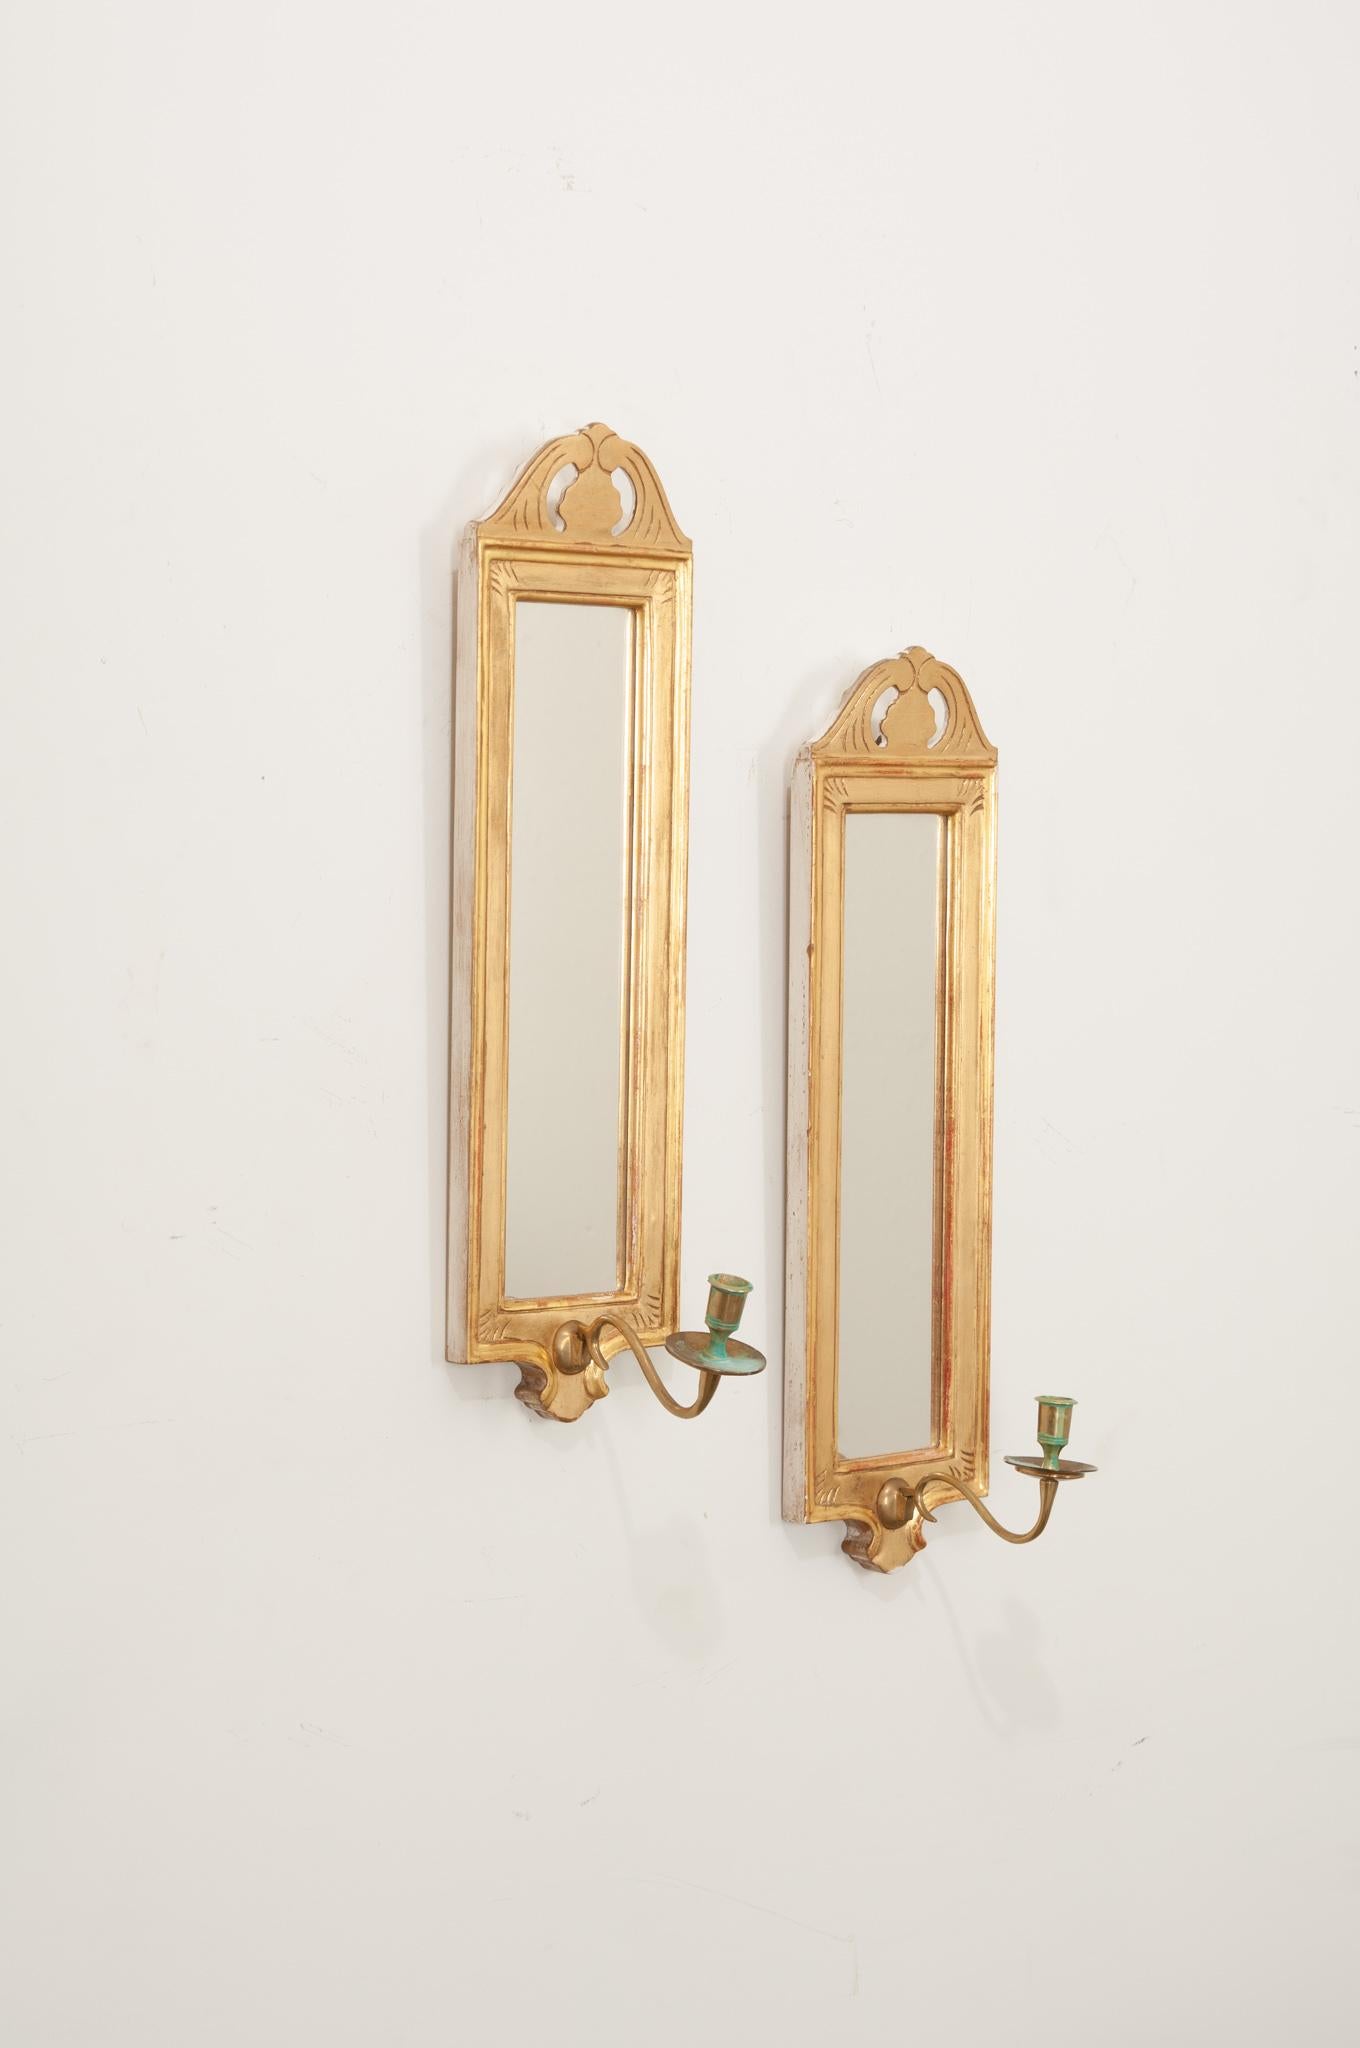 Purchased in Amsterdam- this pair of sconces from Sweden are an absolute gem of a find! Produced by Ikea in the 1970’s before the company opened stores globally, they have the original, burned stamp on the backside indicating their origin and maker.